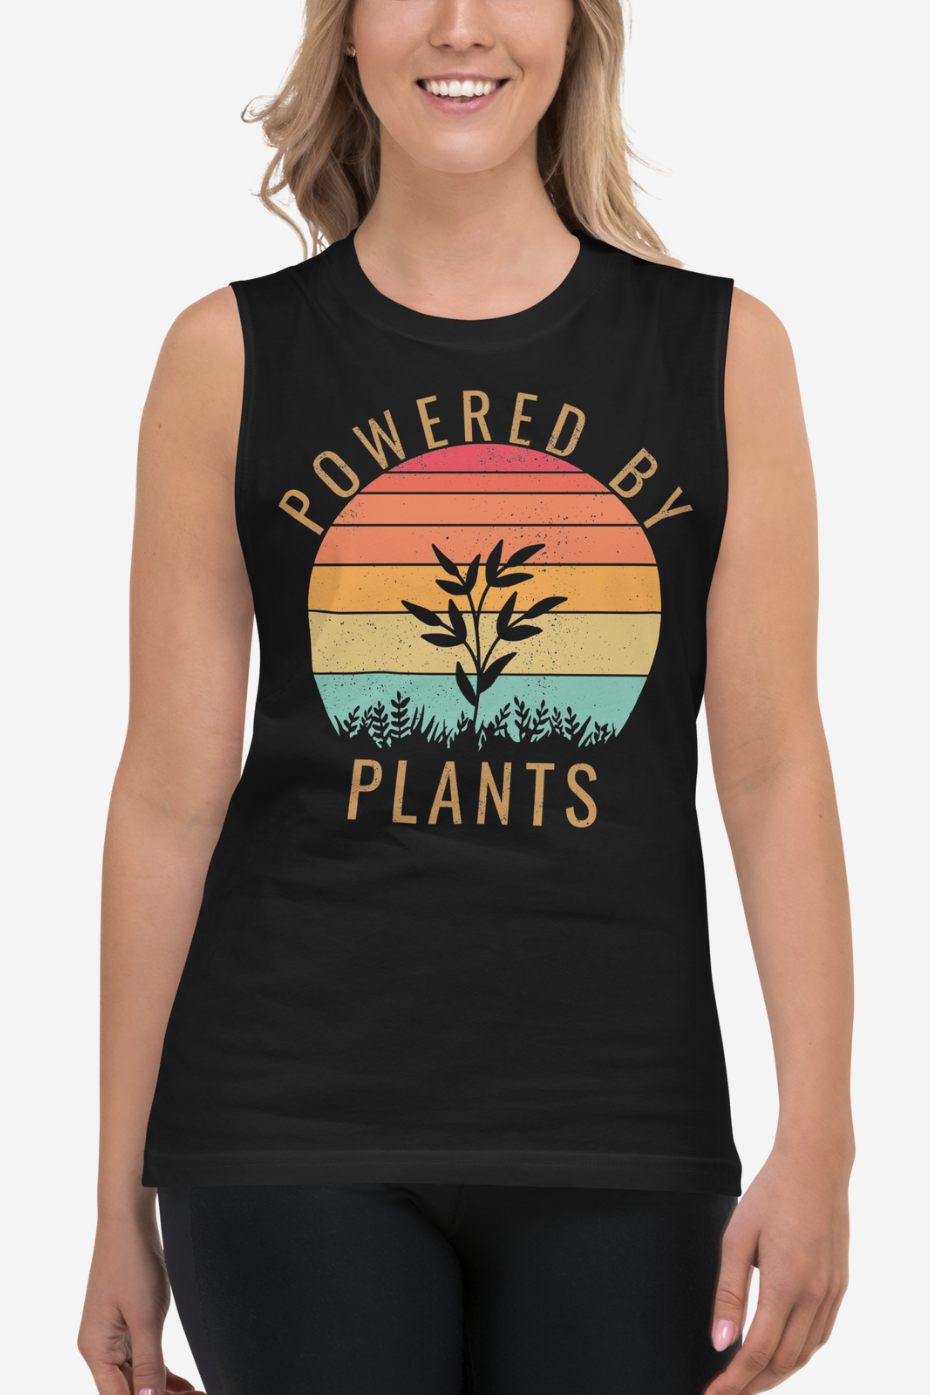 Powered by Plants Muscle Shirt